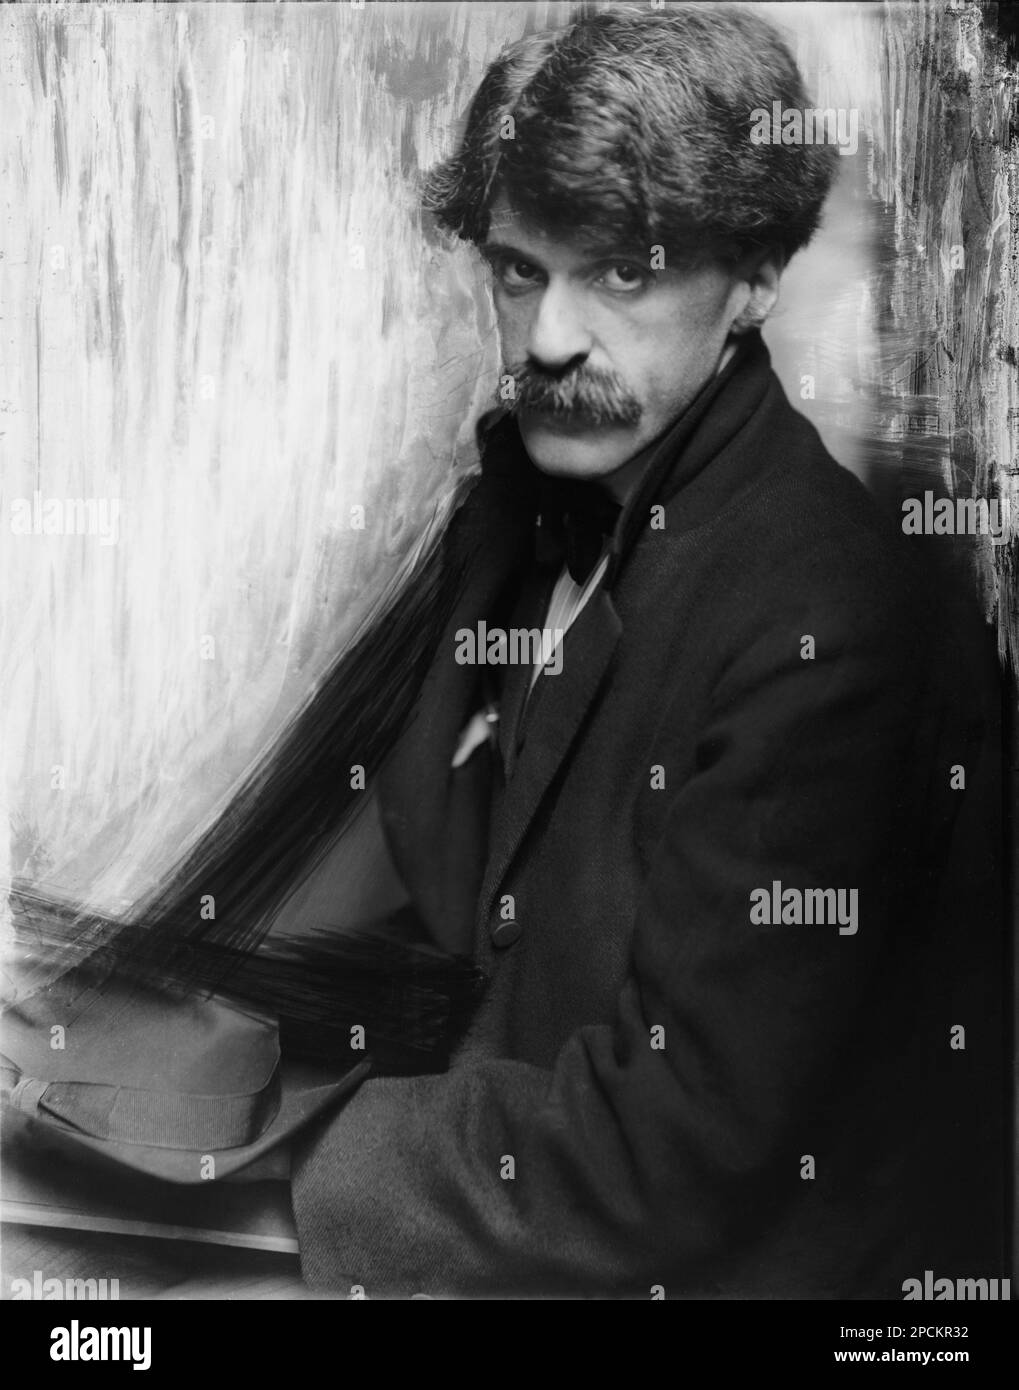 1902 , USA : ALFRED STIEGLITZ  ( 1864 - 1946 ). Photo portrait by woman photographer GERTRUDE KASEBIER ( 1852 - 1934 ). Stieglitz was an American photographer and modern art promoter who was instrumental over his fifty-year career in making photography an accepted art form. In addition to his photography, Stieglitz is known for the New York art galleries that he ran in the early part of the 20th century, where he introduced many avant-garde European artists to the U.S. He was married to painter Georgia O'Keeffe -  PORTRAIT - RITRATTO  - baffi - moustache - ARTE - VISUAL ARTS - ARTI VISIVE  - B Stock Photo